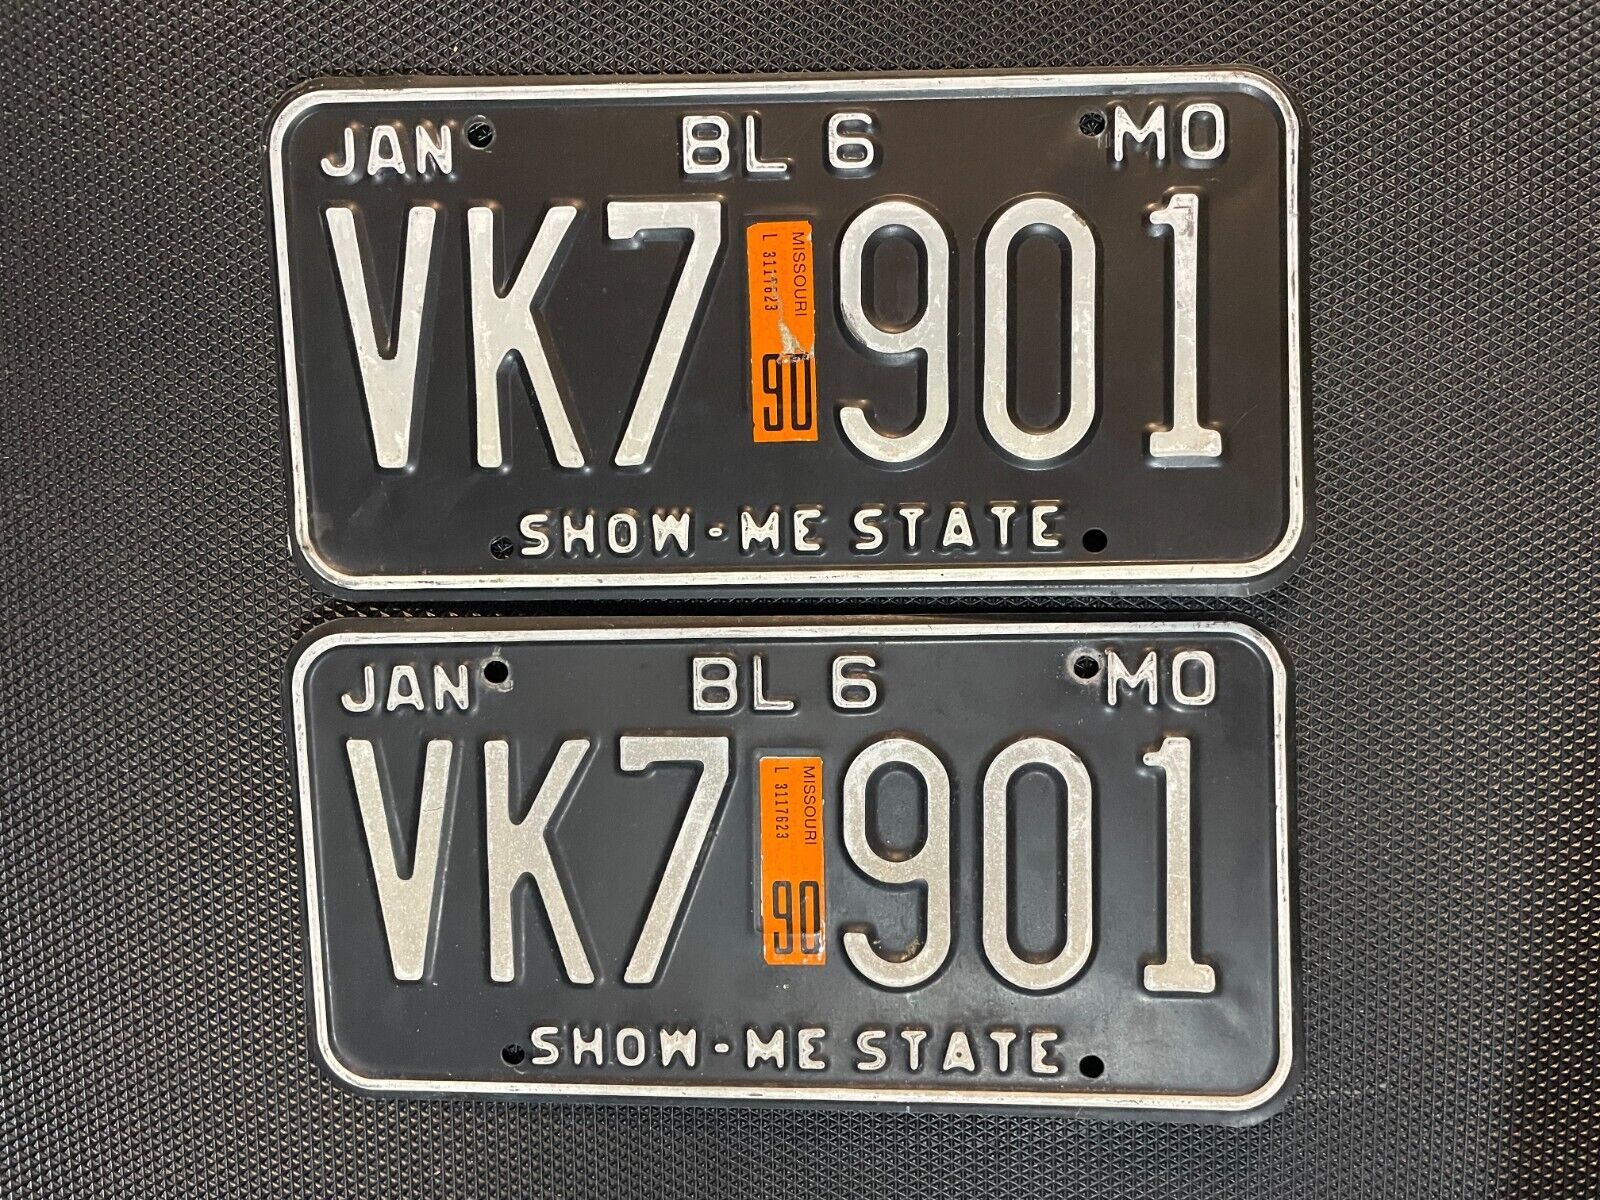 MISSOURI LICENSE PLATE PAIR TRUCK JANUARY 1990 VK7 901 SHOW-ME STATE